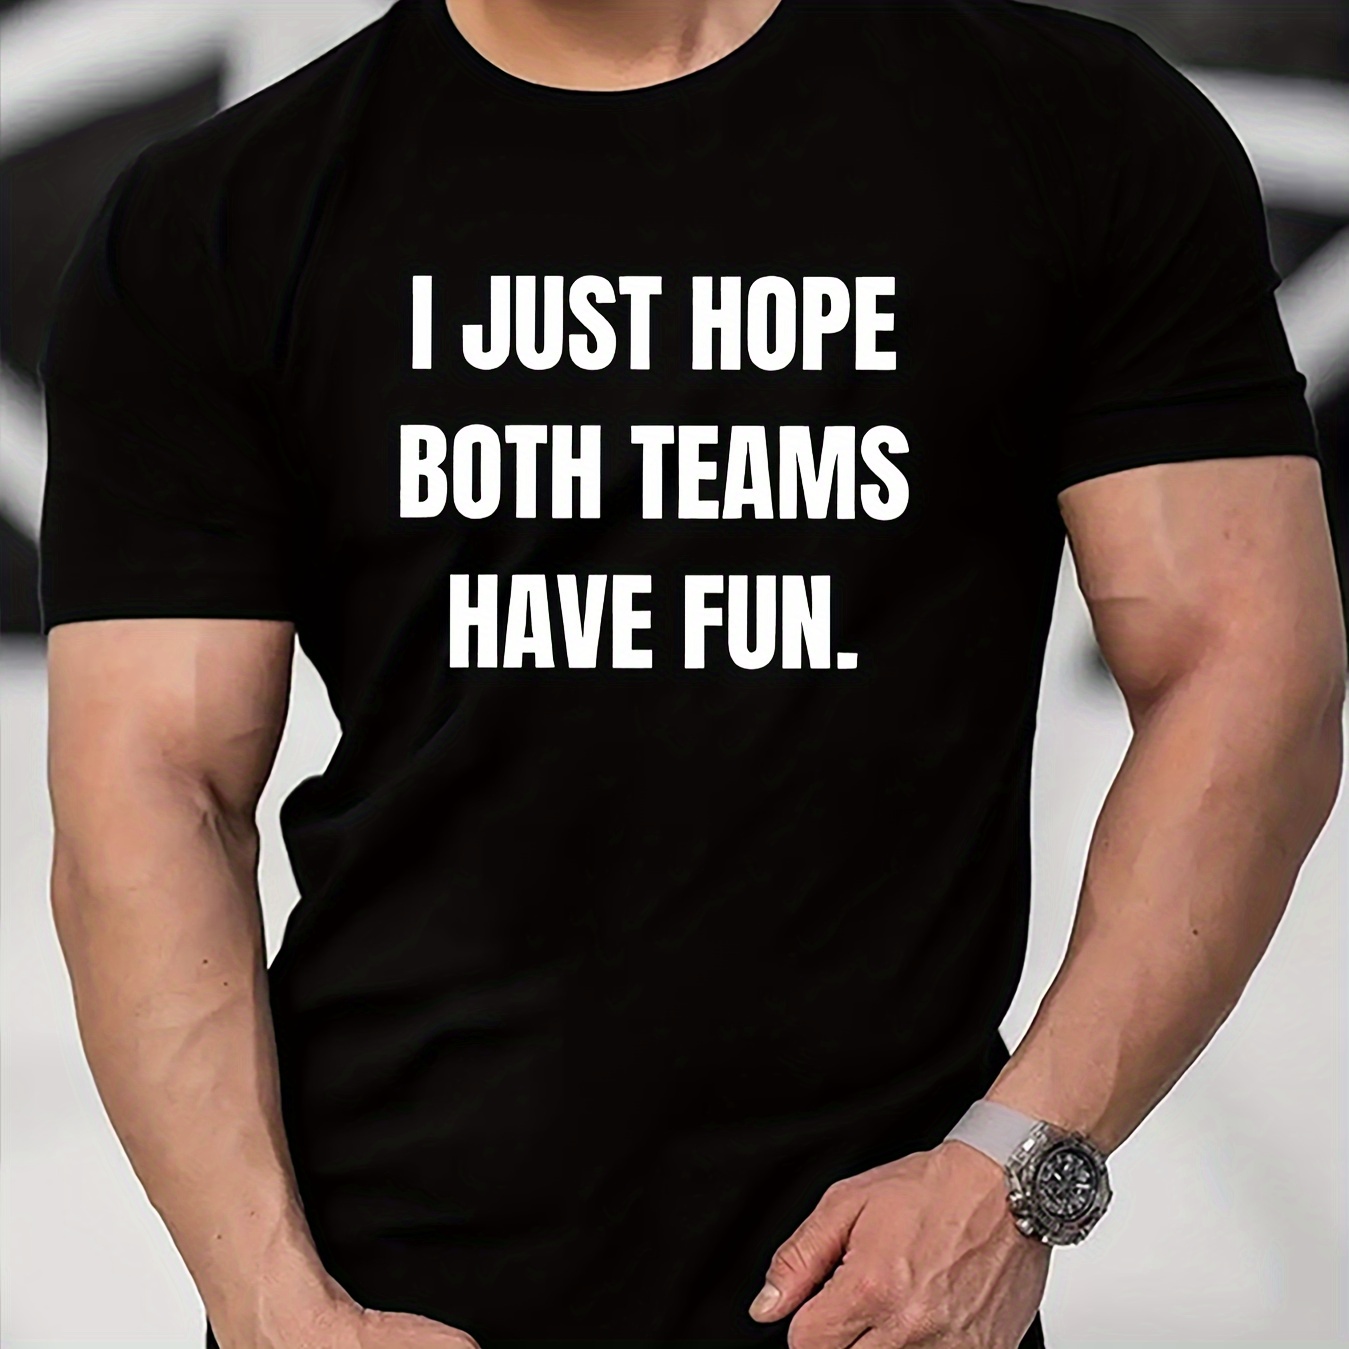 

I Just Hope Both Teams Have Fun Letters Print Casual Crew Neck Short Sleeves For Men, Quick-drying Comfy Casual Summer T-shirt For Daily Wear Work Out And Vacation Resorts